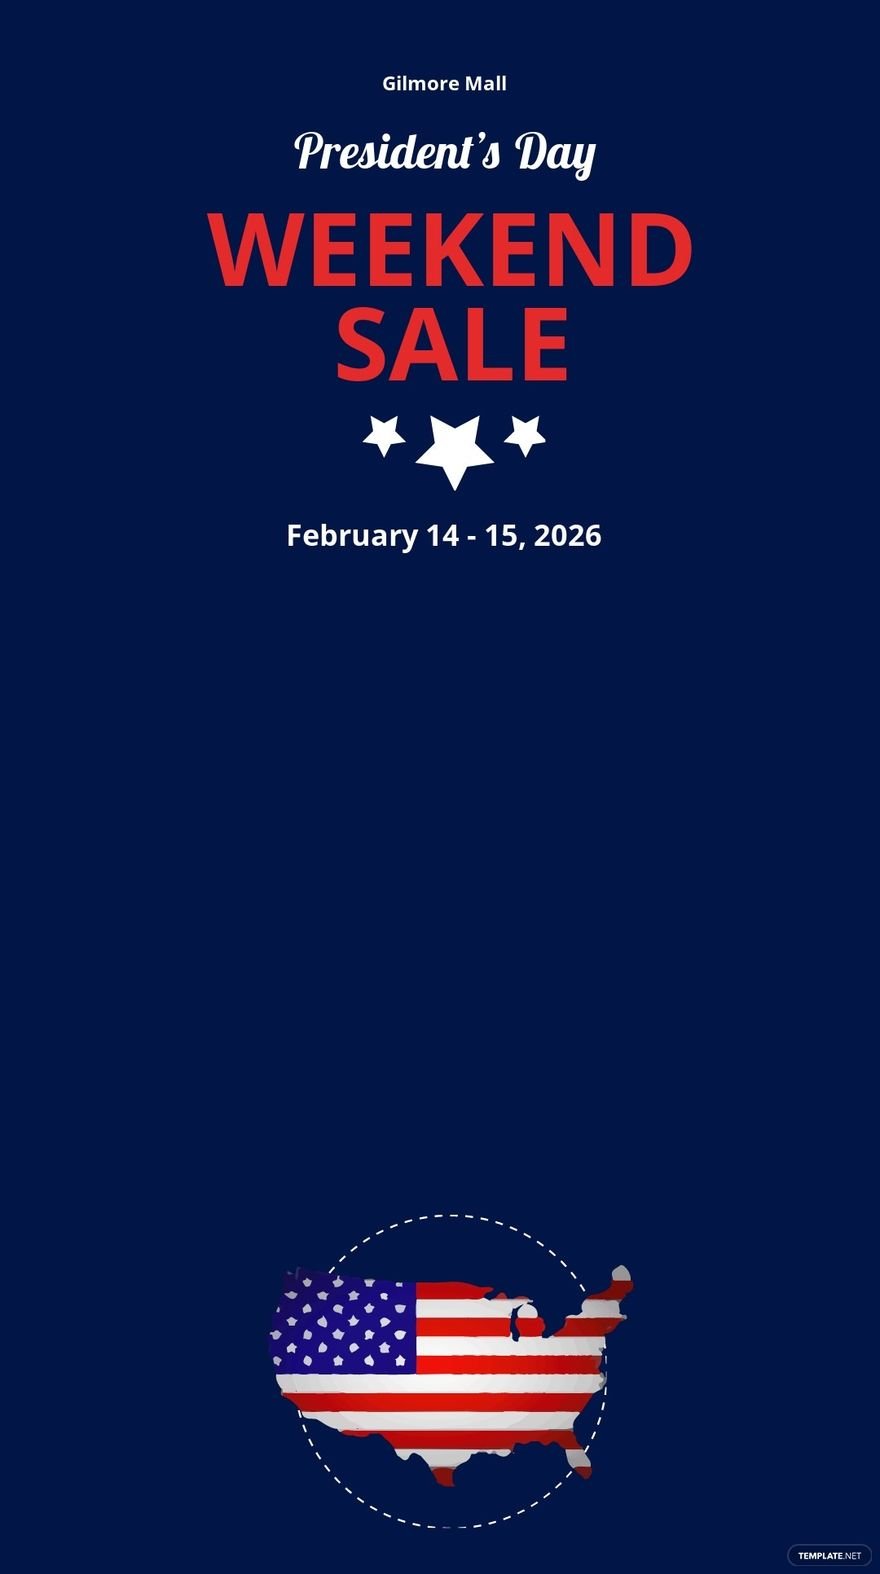 Presidents Day Weekend Sale Snapchat Geofilter